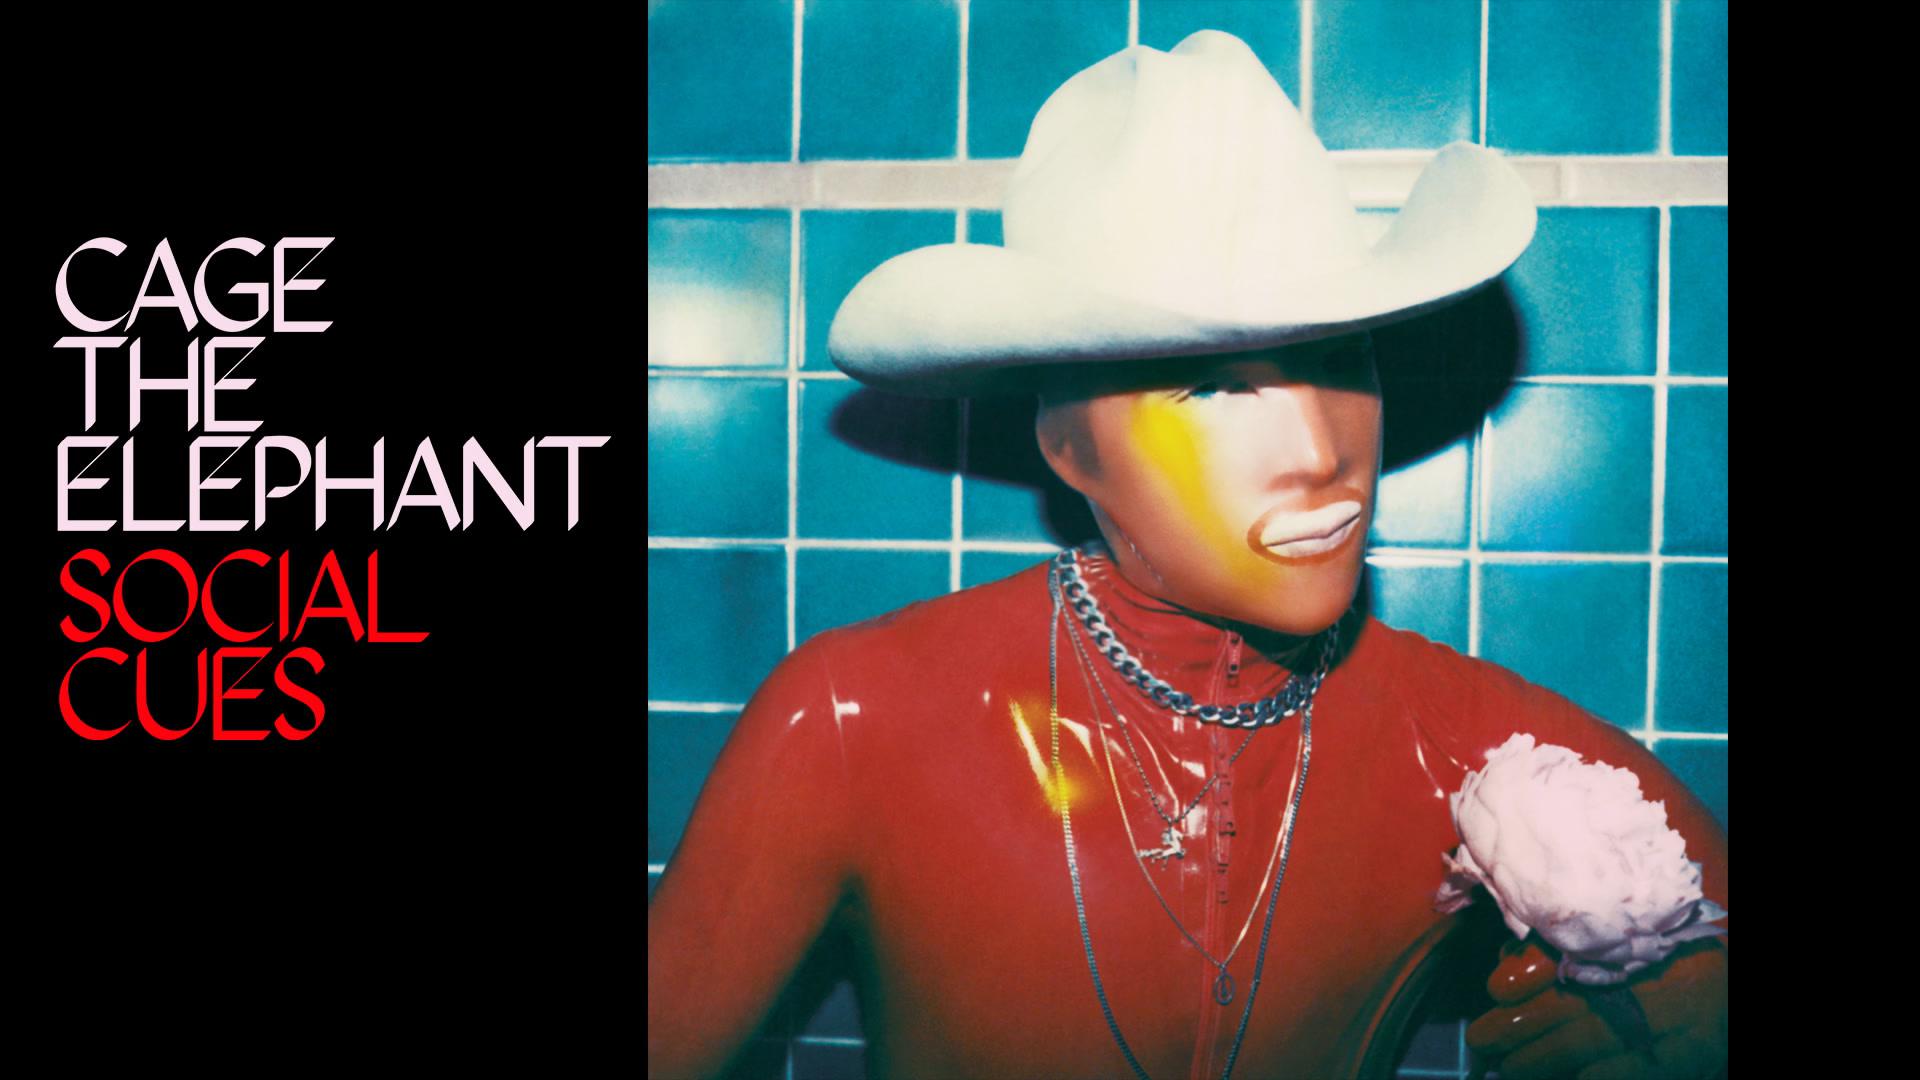 Cage the Elephant - Love's The Only Way (Audio)